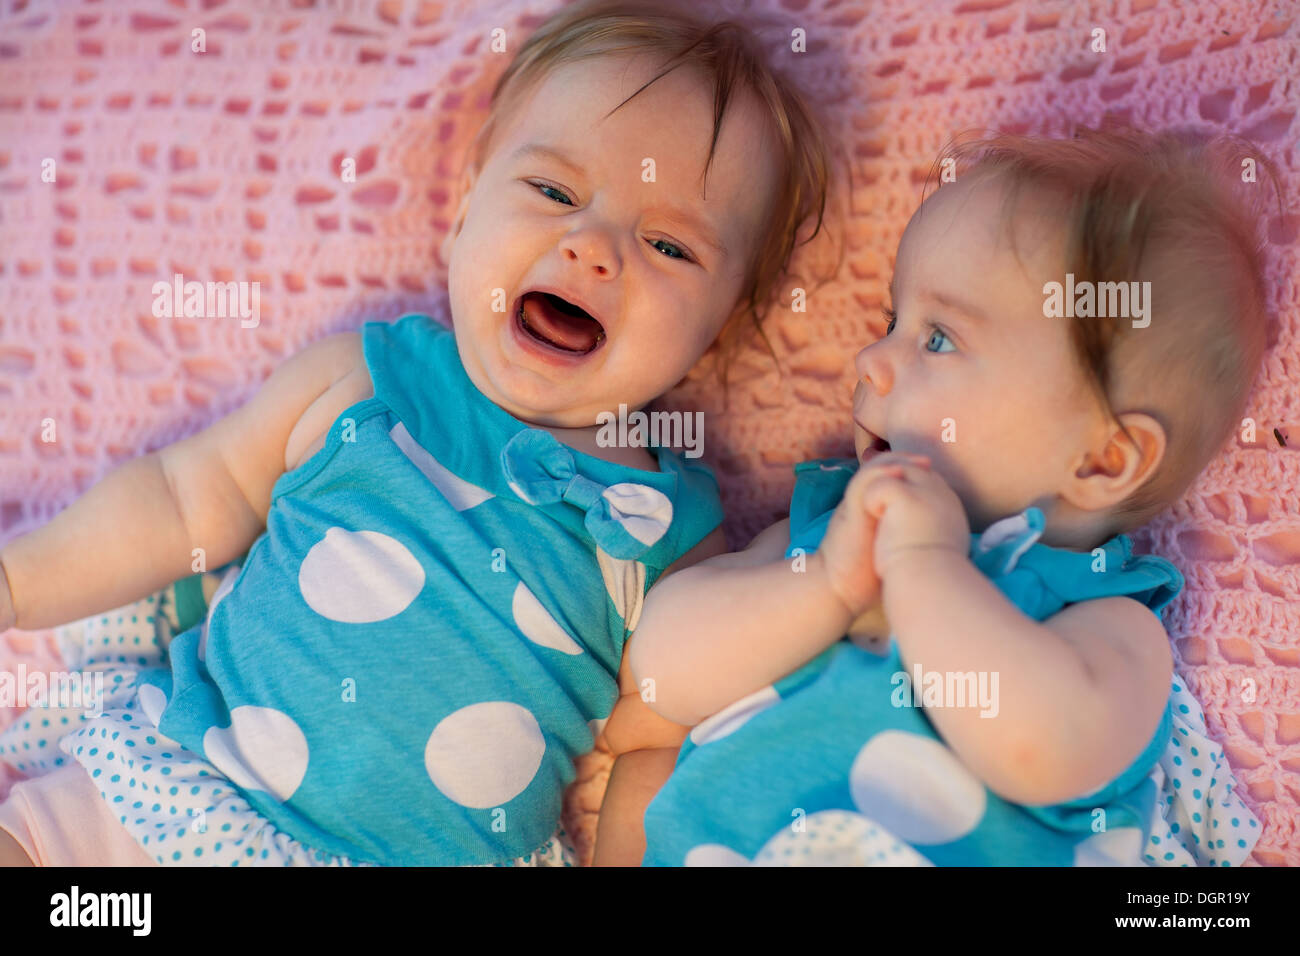 Sweet little twins lying on a pink blanket. They in blue dress with white polka dots. Stock Photo